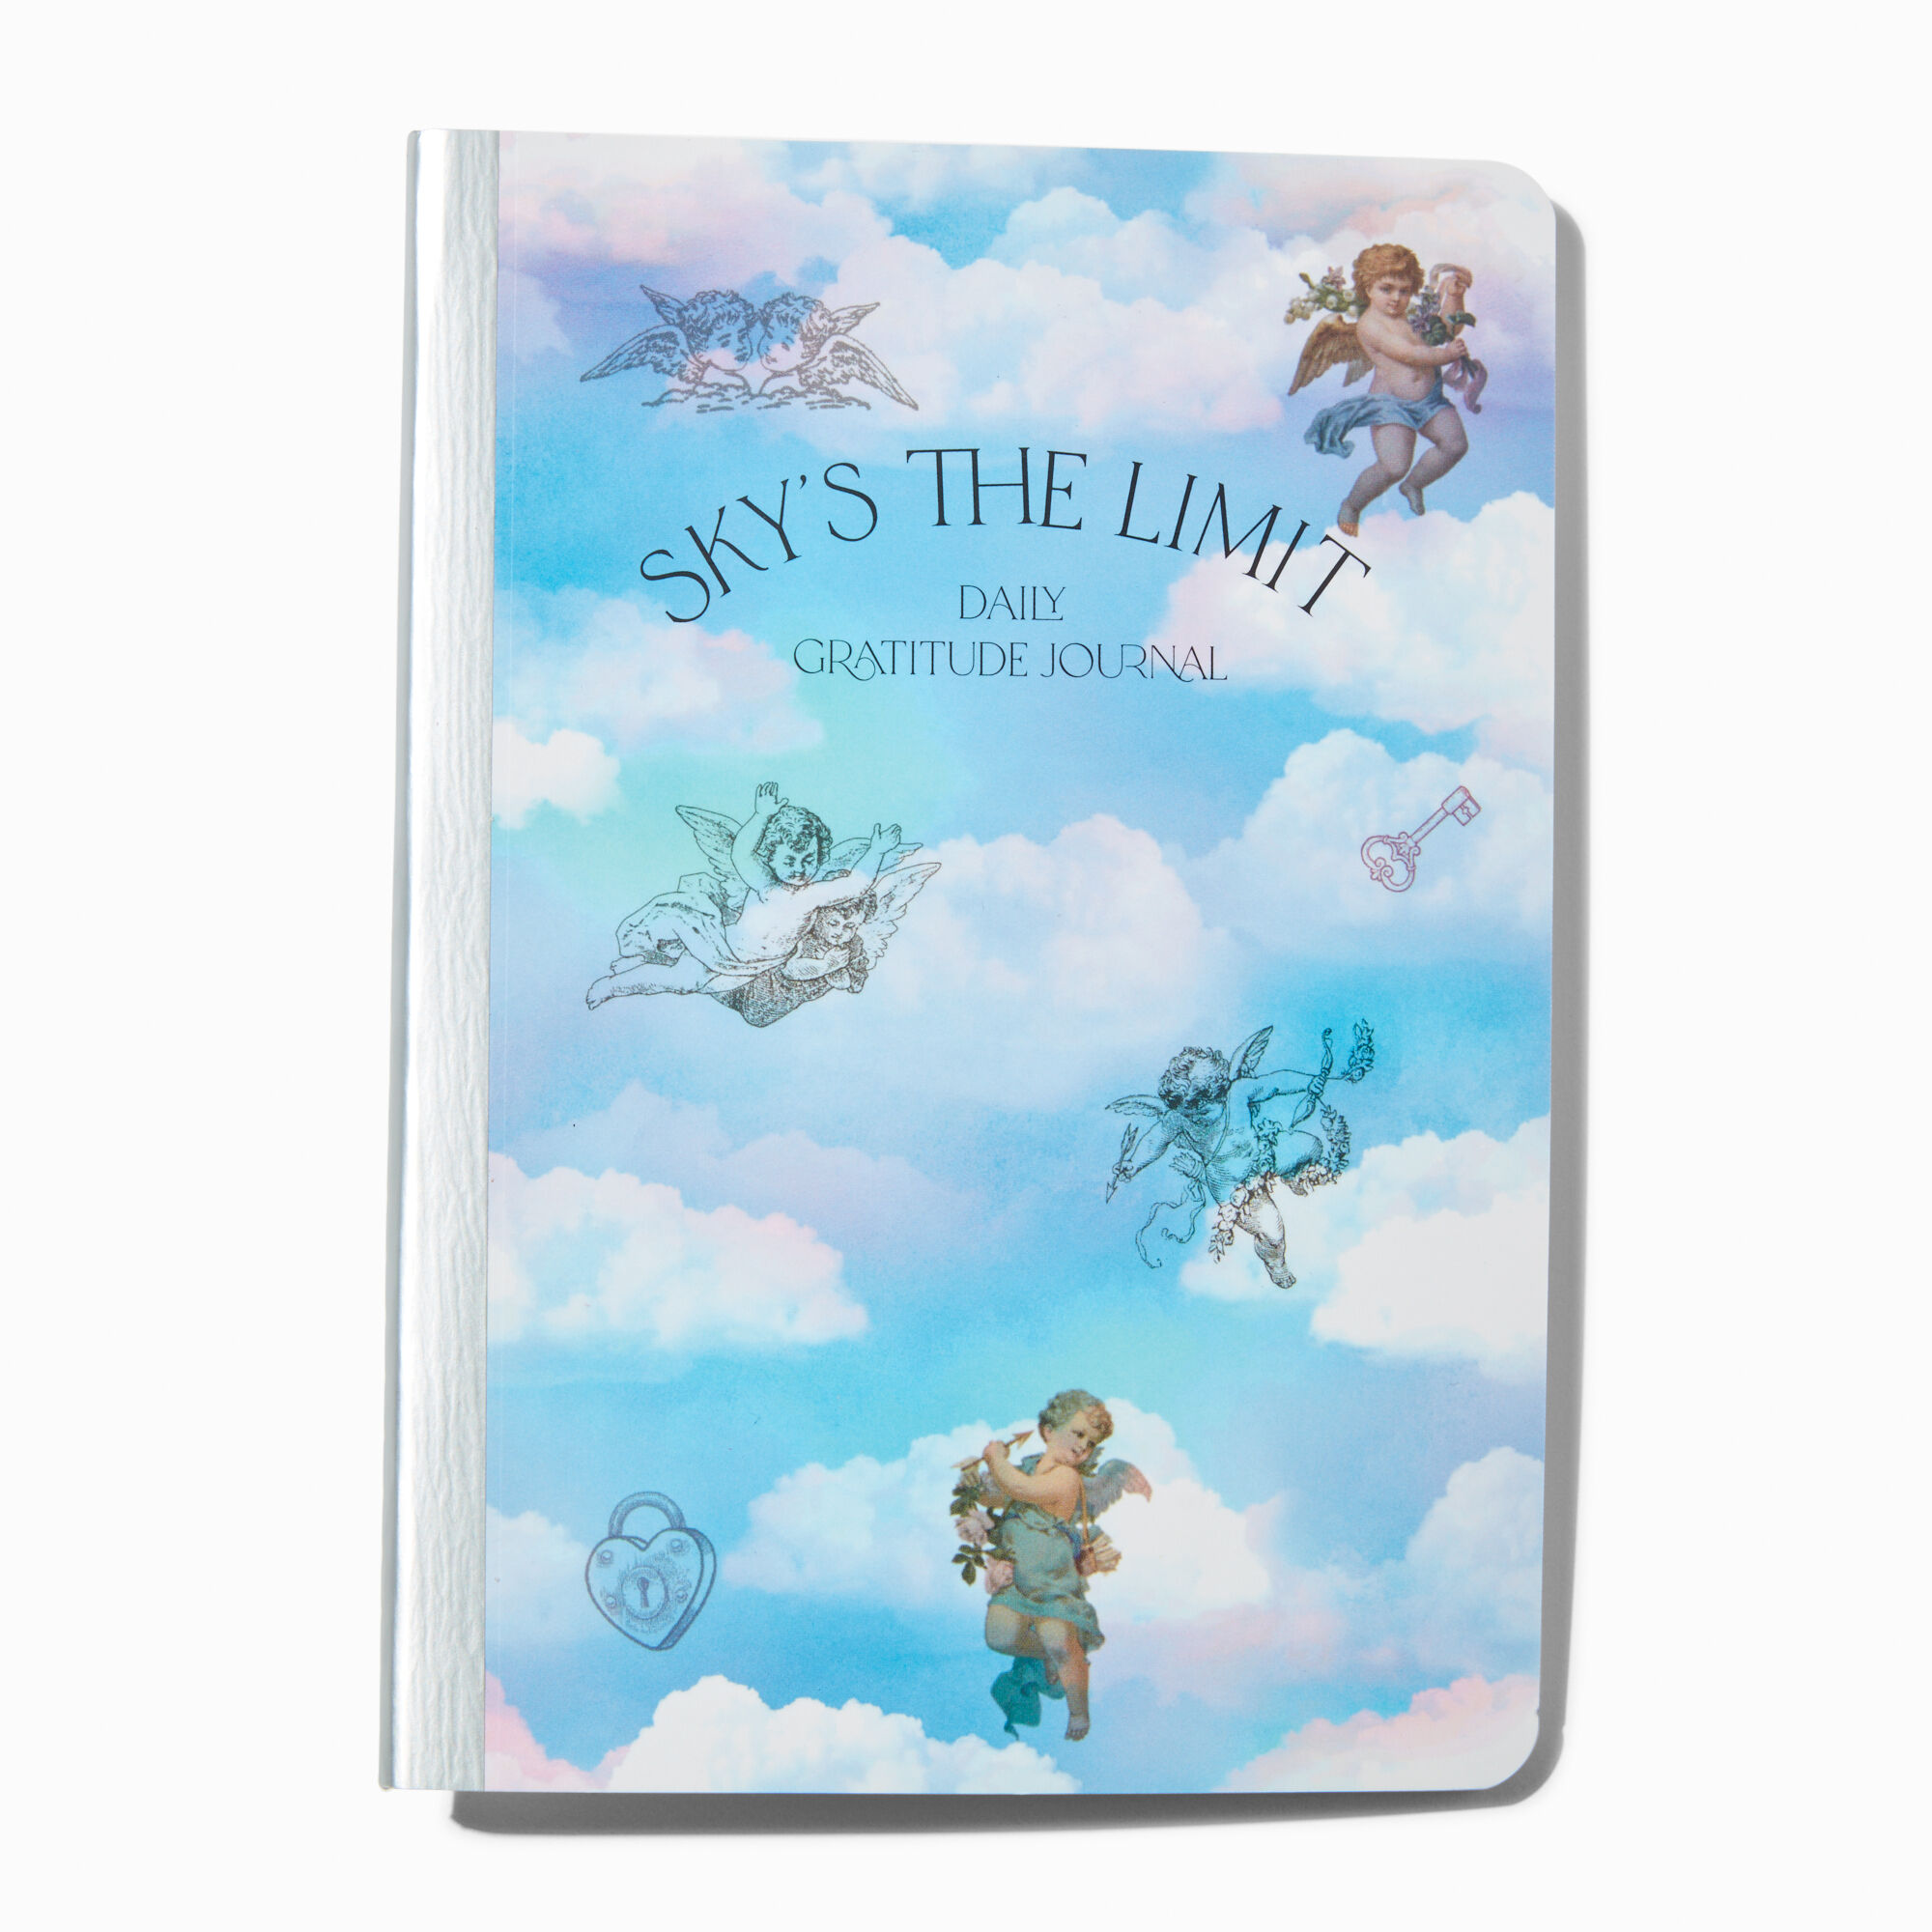 View Claires skys The Limit Daily Gratitude Journal information